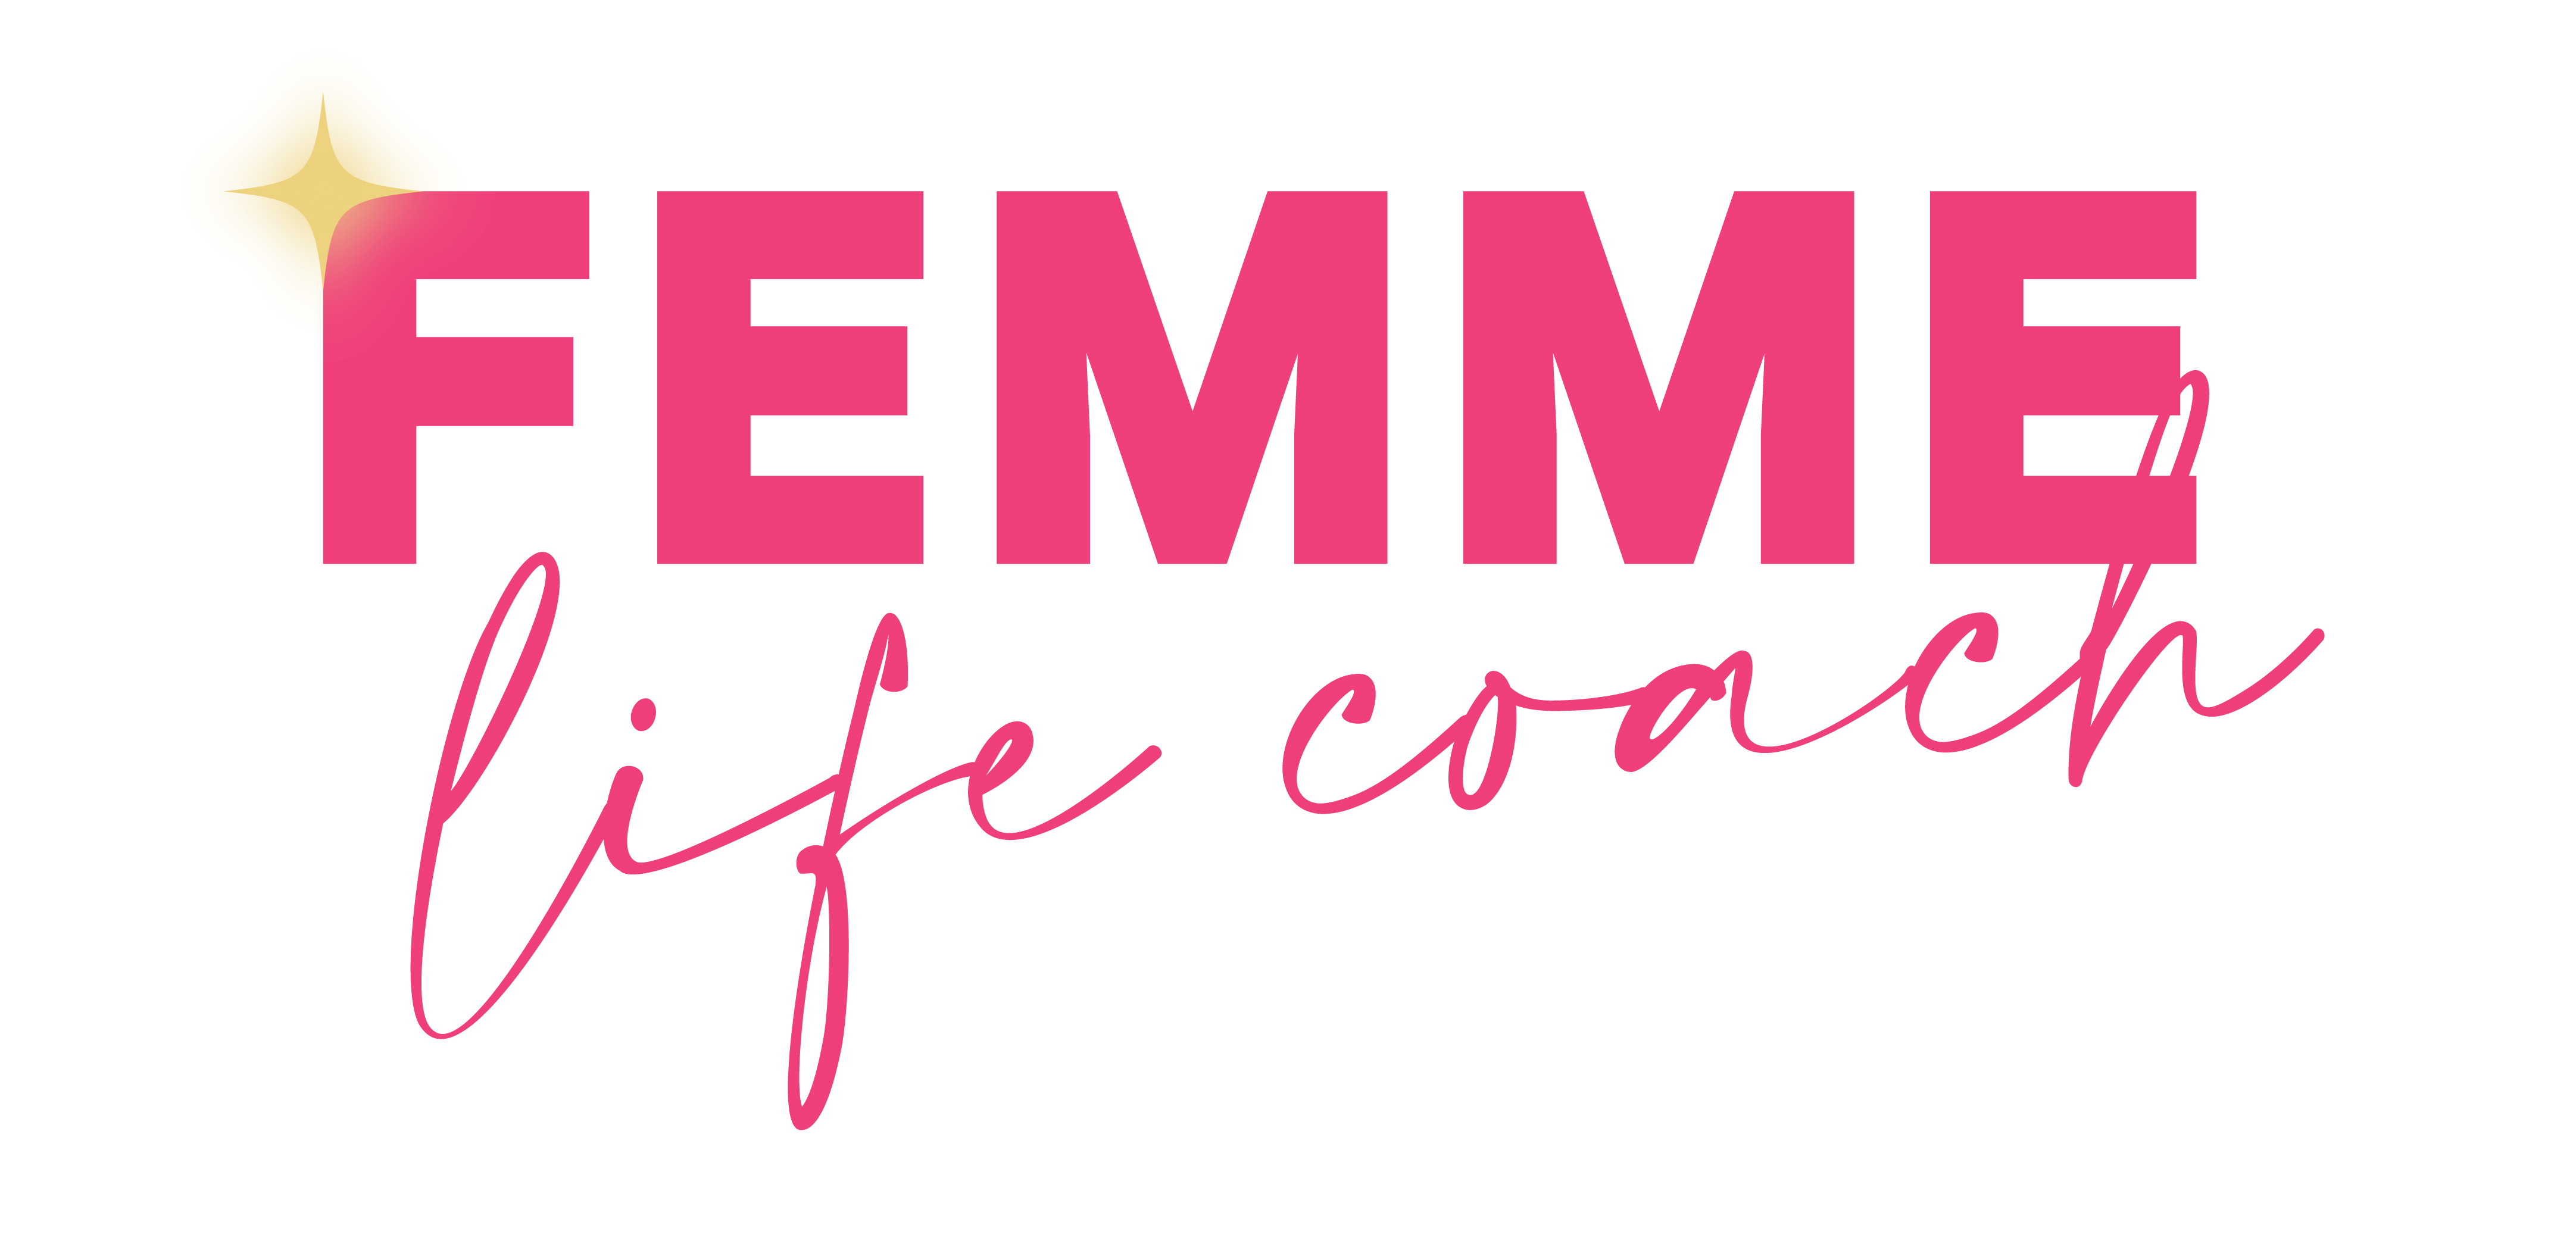 Femme Life Coach - Empowering You Back to Love